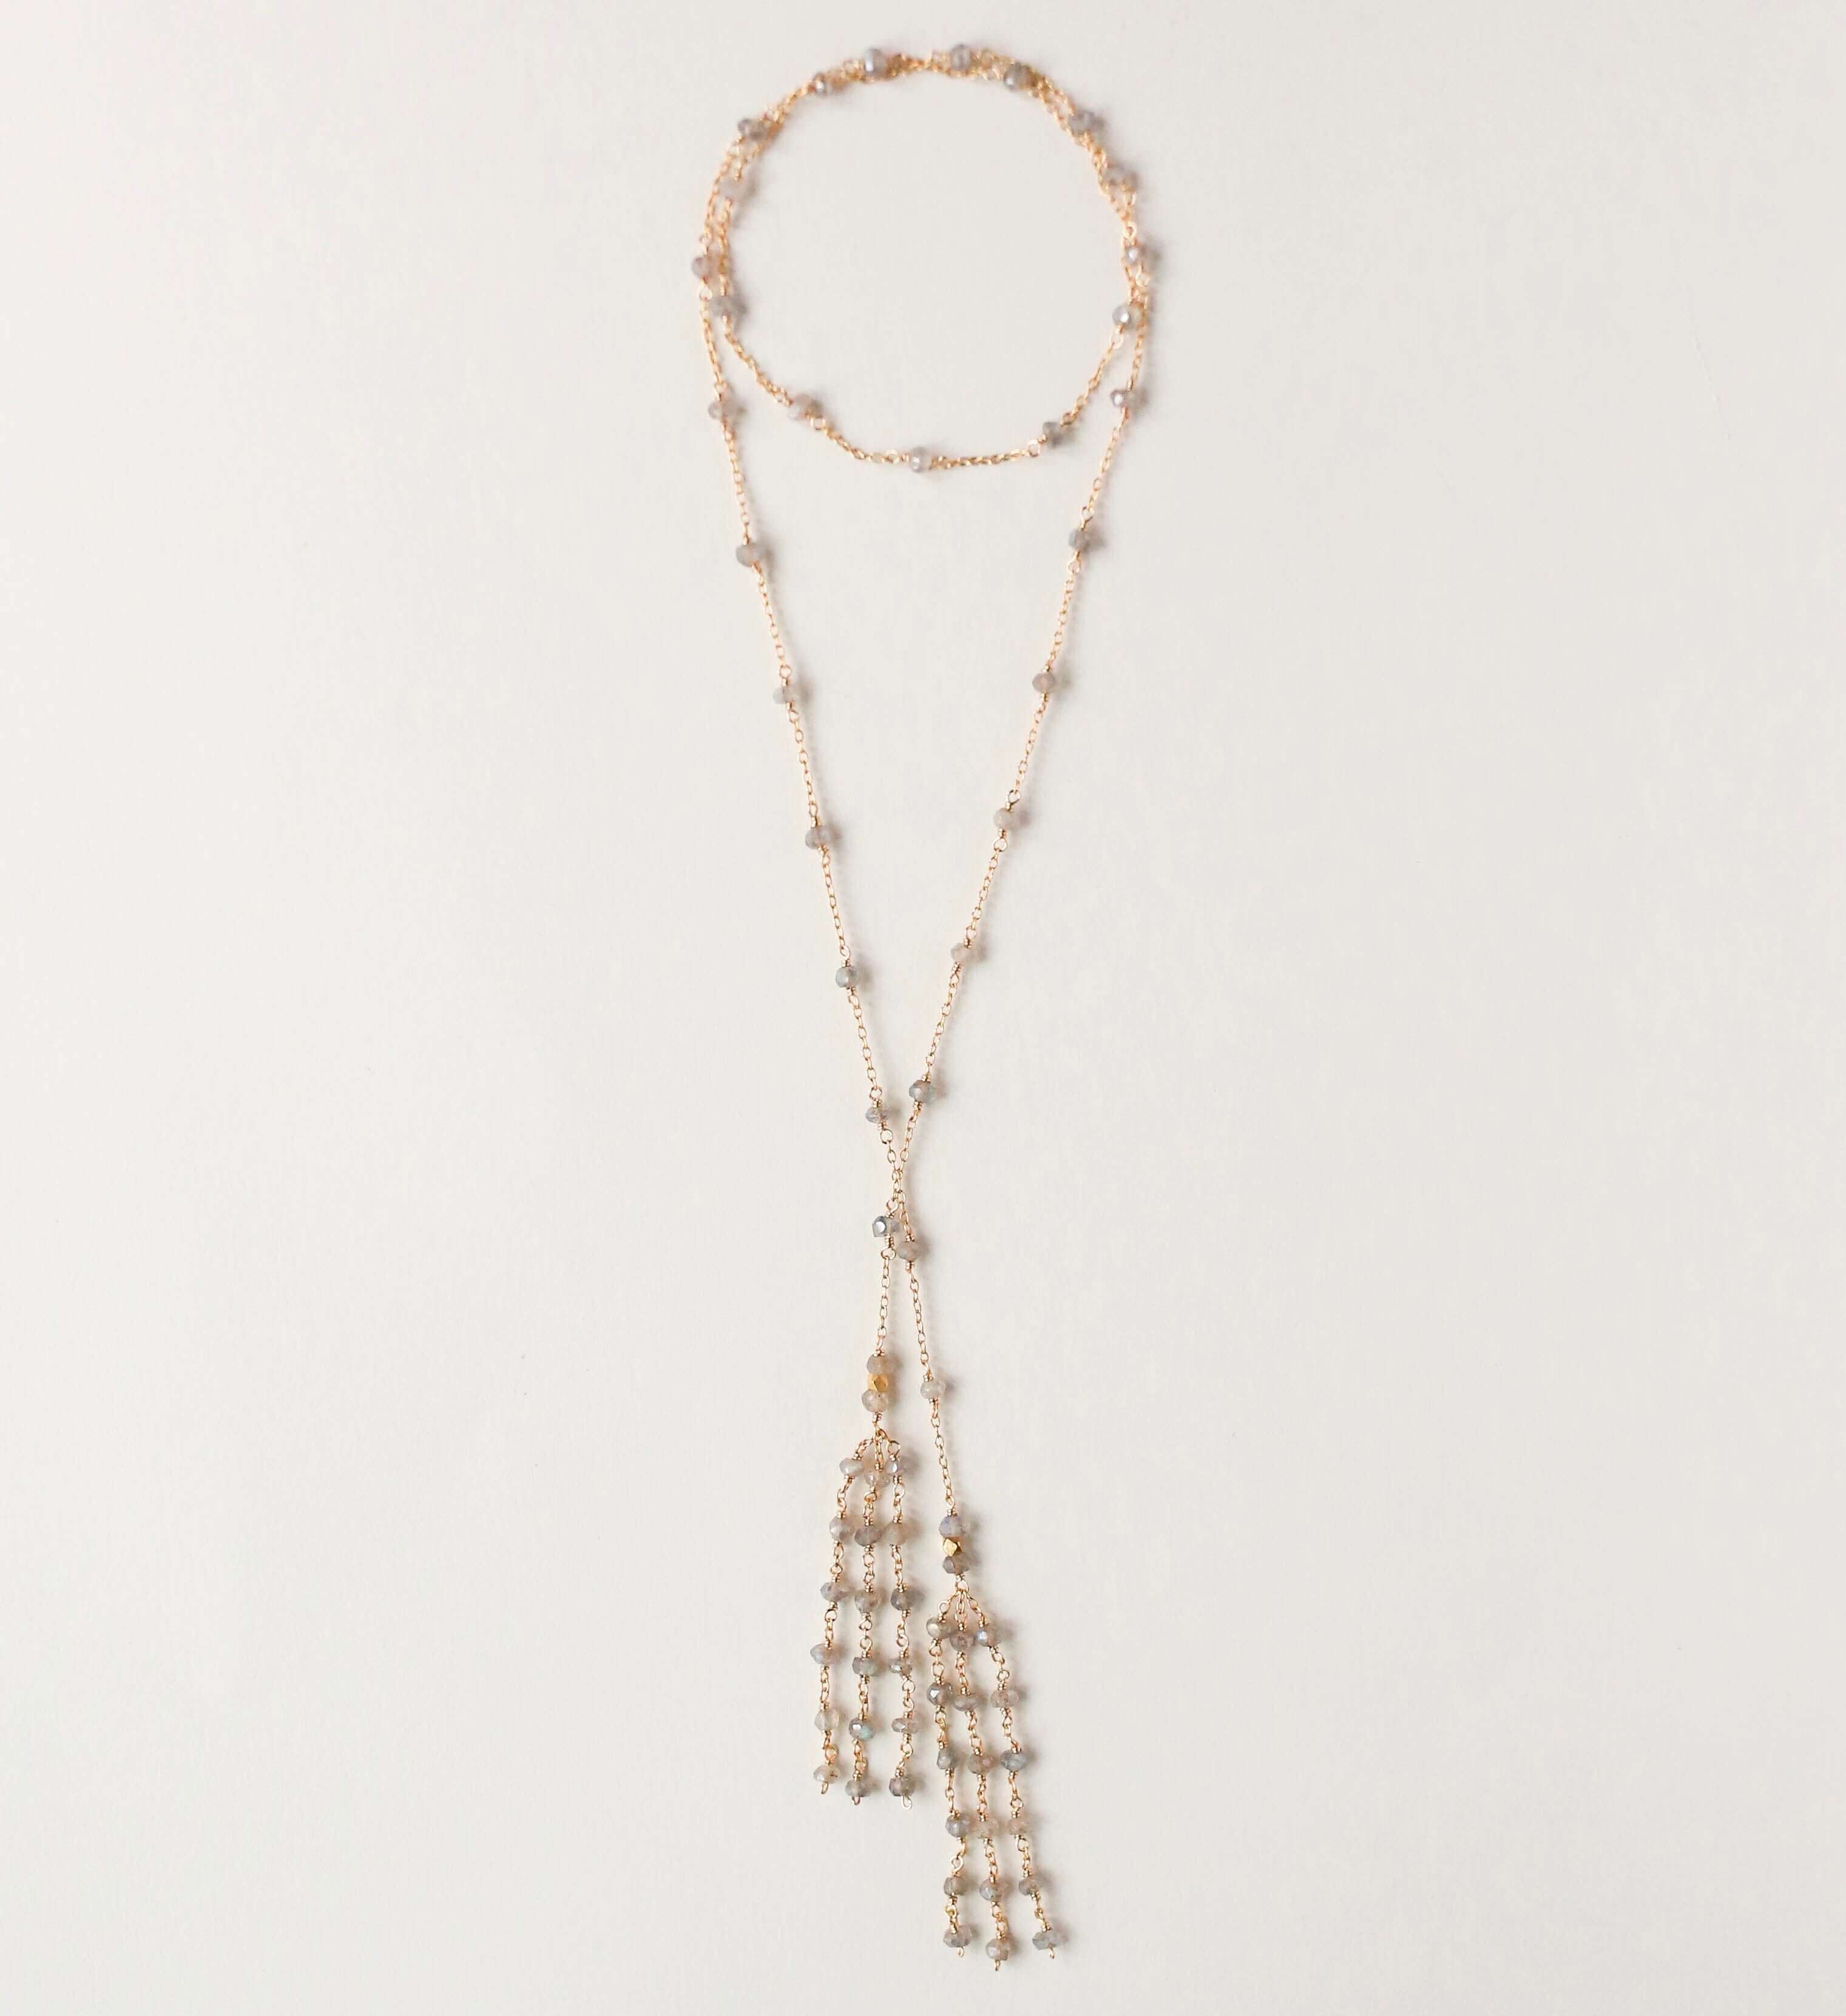 Gold  plated Labradorite Lariat Necklace with a stunning tassel